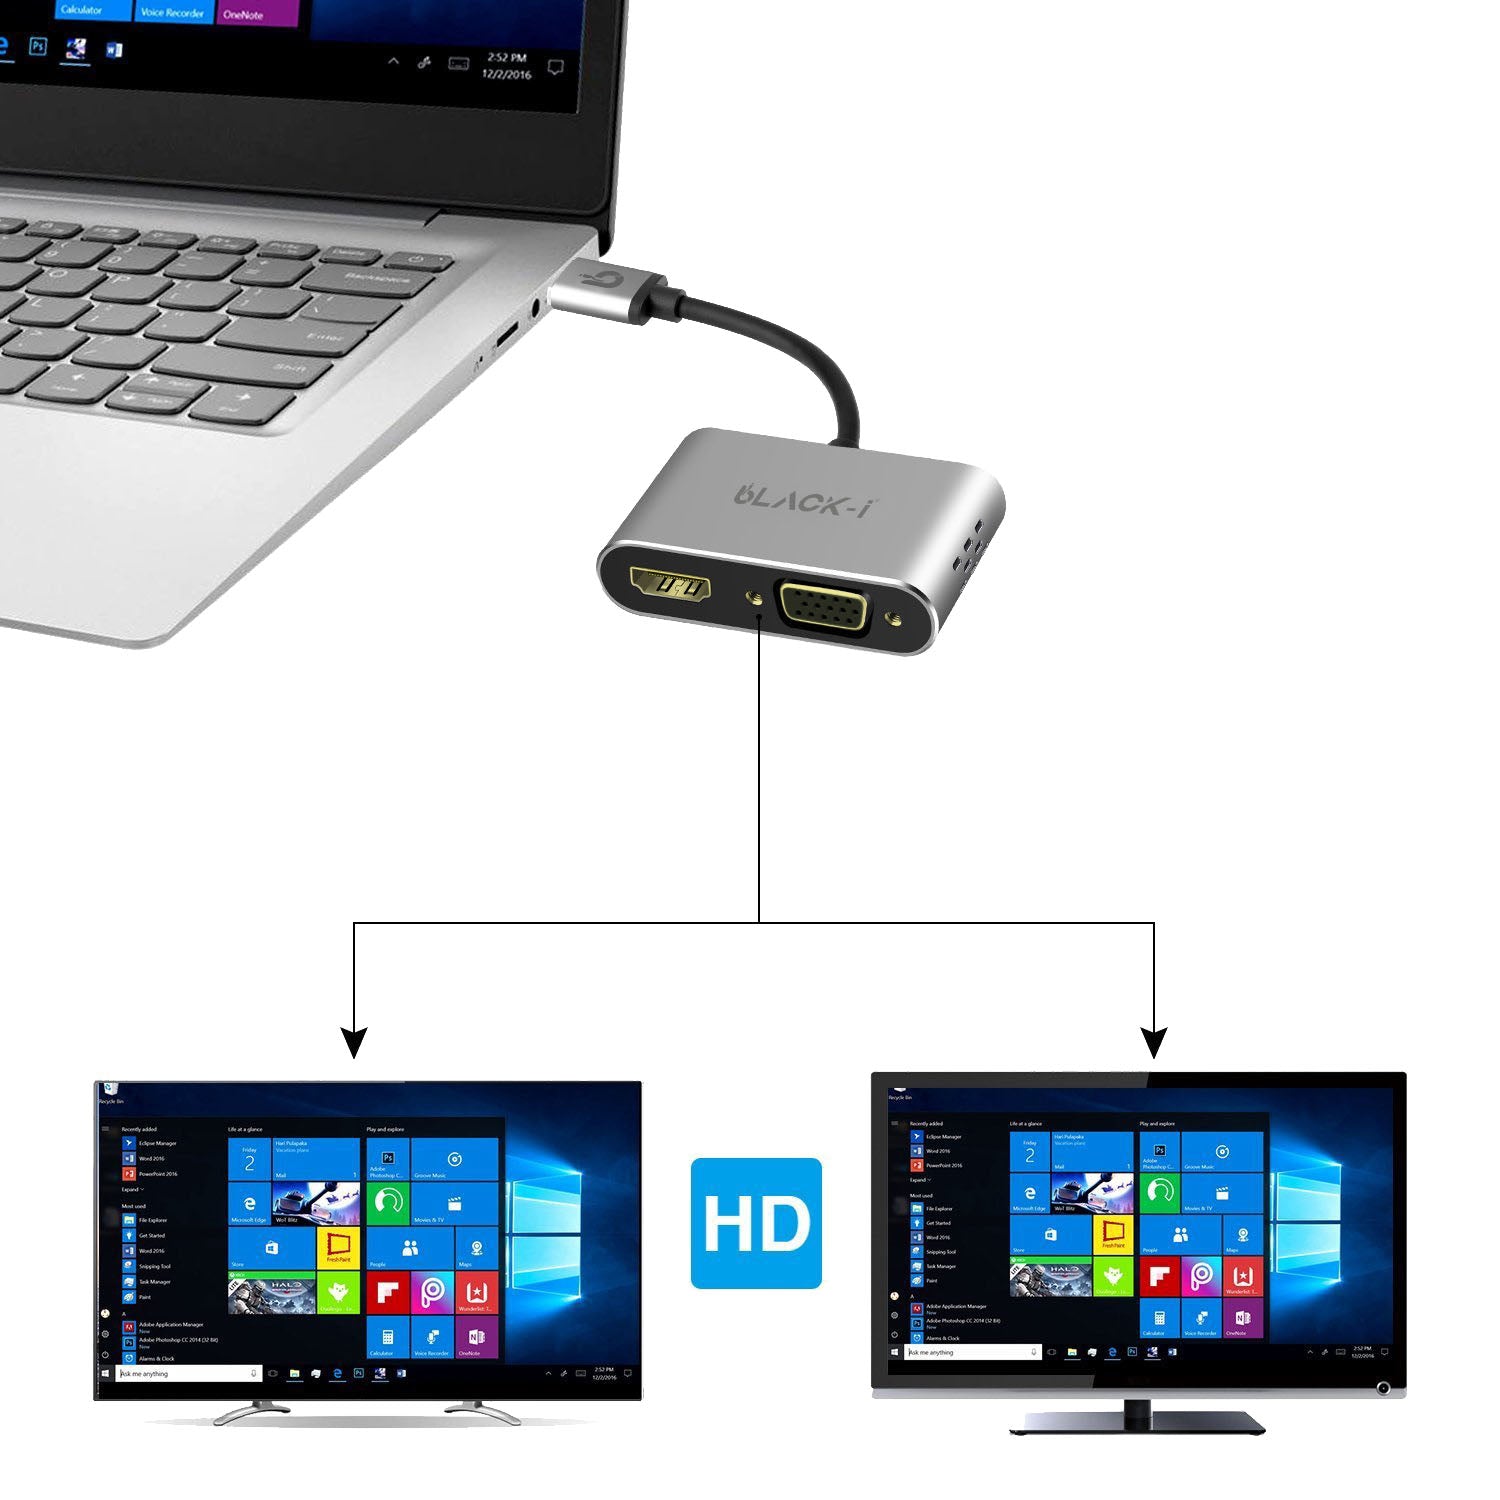 Black-i USB 3.0 to HDMI & VGA Converter – Dual Display Connectivity for Versatile Visual Expansion and Enhanced Productivity